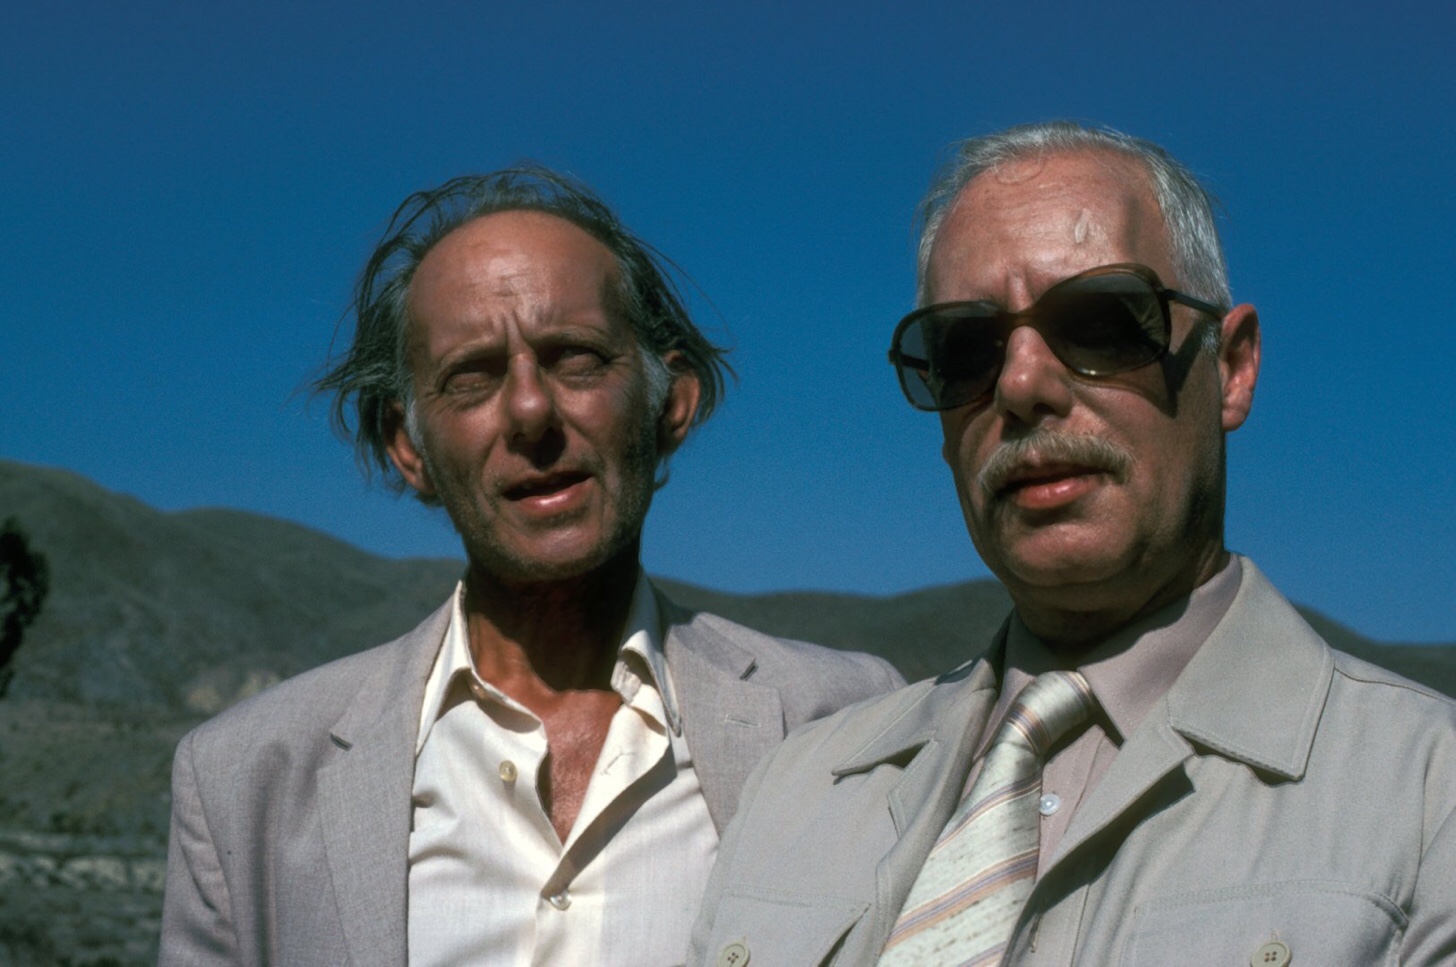 Oscar Quitak as Richard Bauer and Clifford Rose as Ludwig Kessler in Kessler, a six-part sequel to Secret Army, first broadcast in 1981. Image: BBC